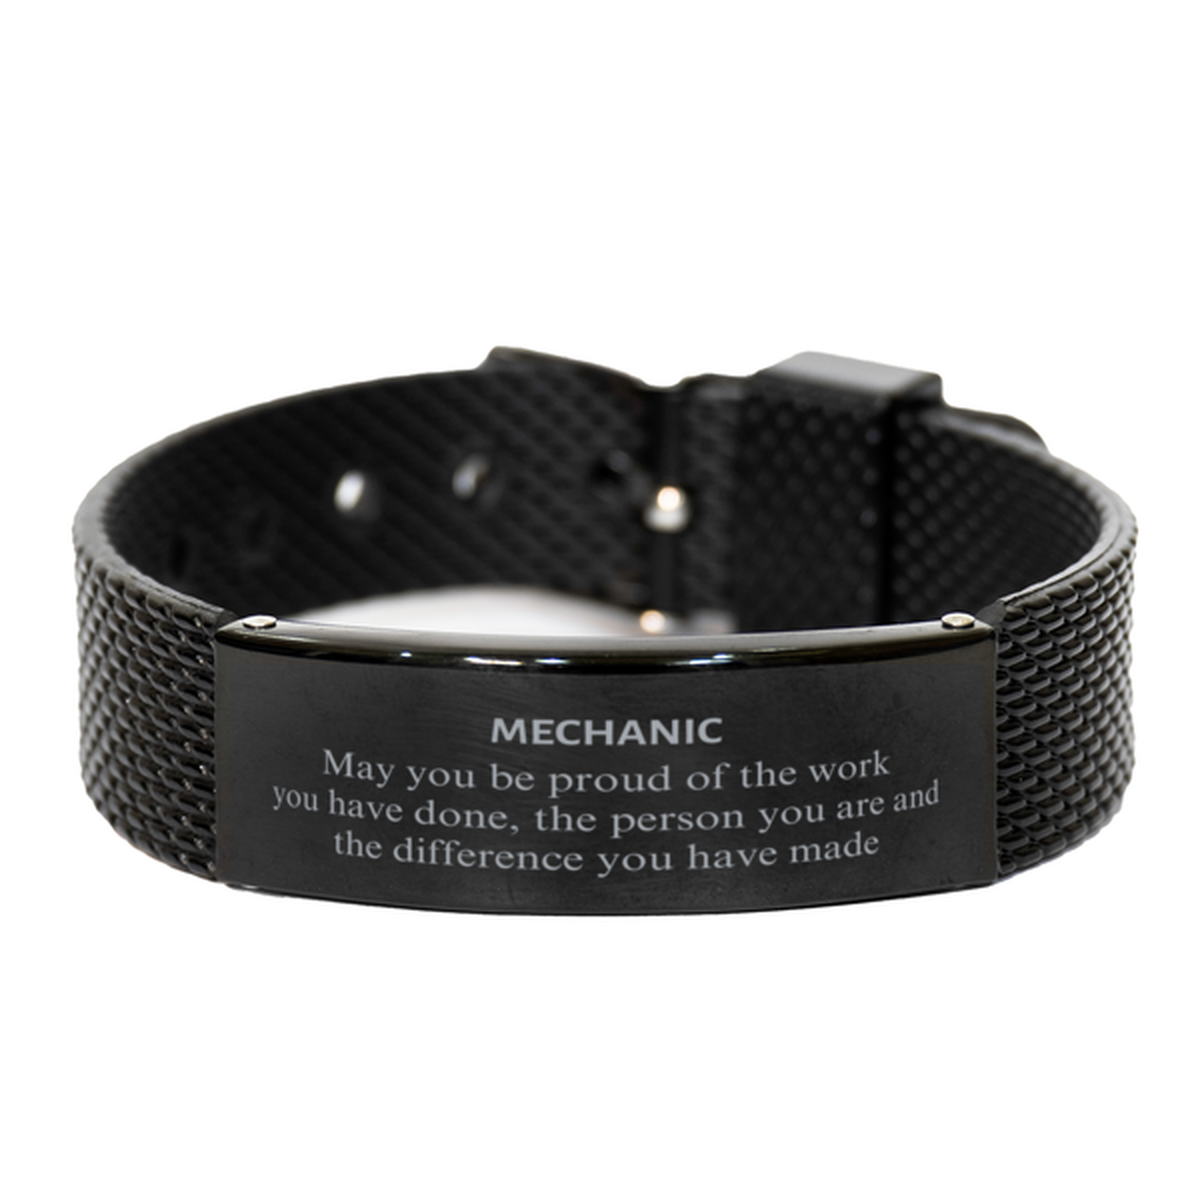 Mechanic May you be proud of the work you have done, Retirement Mechanic Black Shark Mesh Bracelet for Colleague Appreciation Gifts Amazing for Mechanic